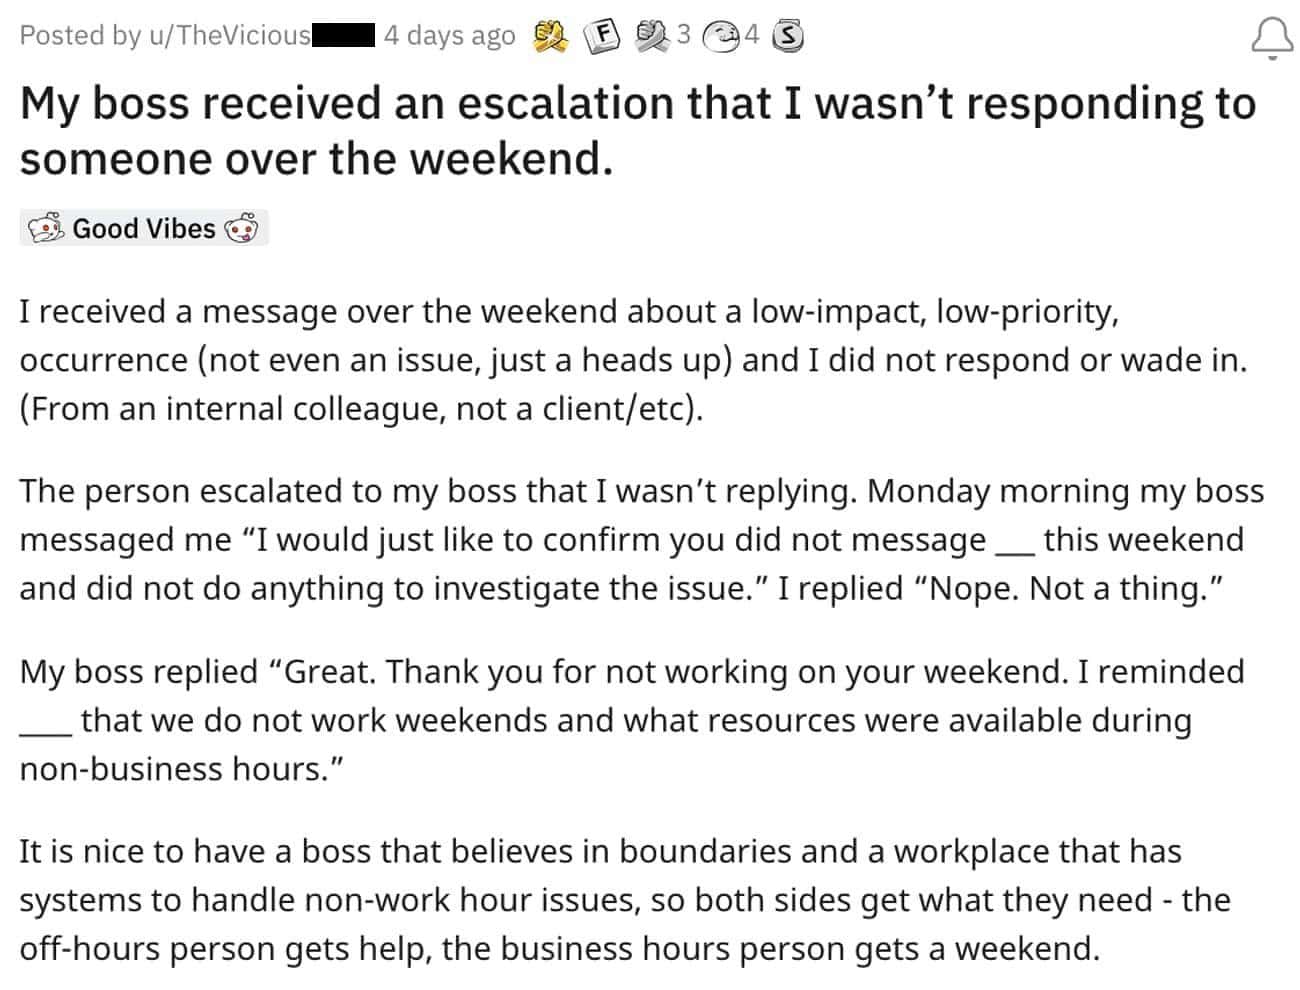 The Boss's Response To The Employee Not Responding To E-Mails Over The Weekend